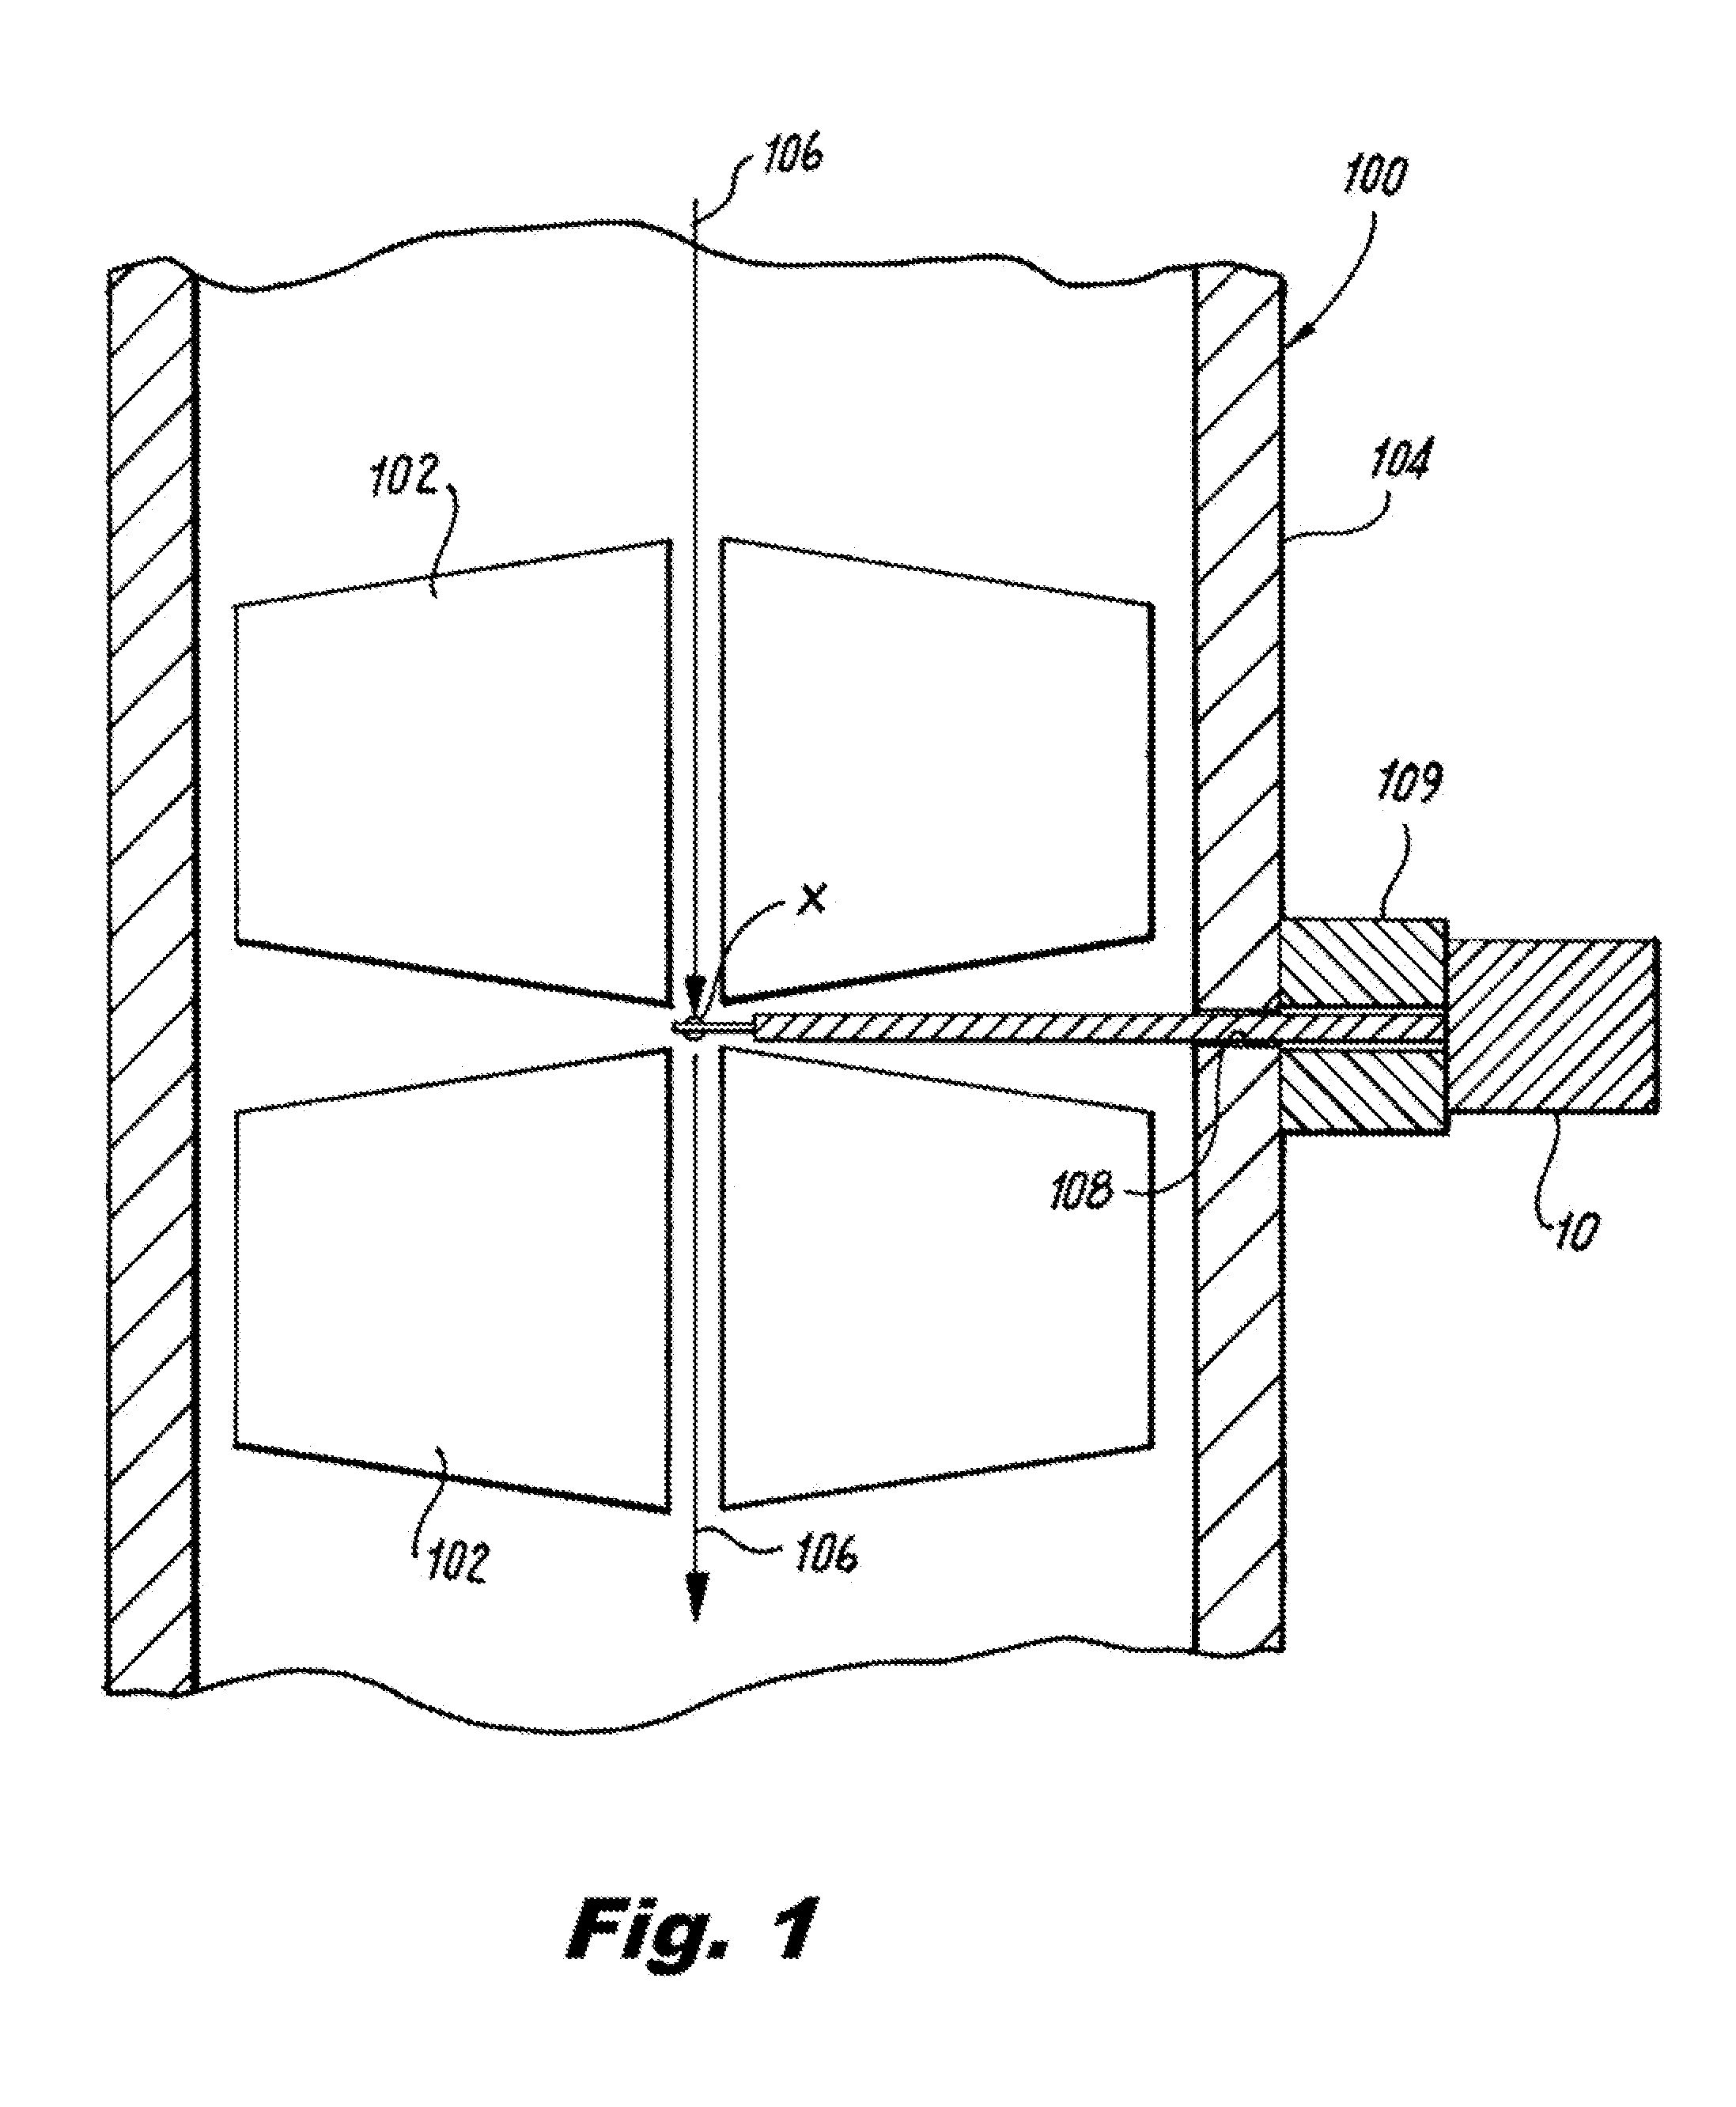 Sample Holder with Optical Features for Holding a Sample in an Analytical Device for Research Purposes